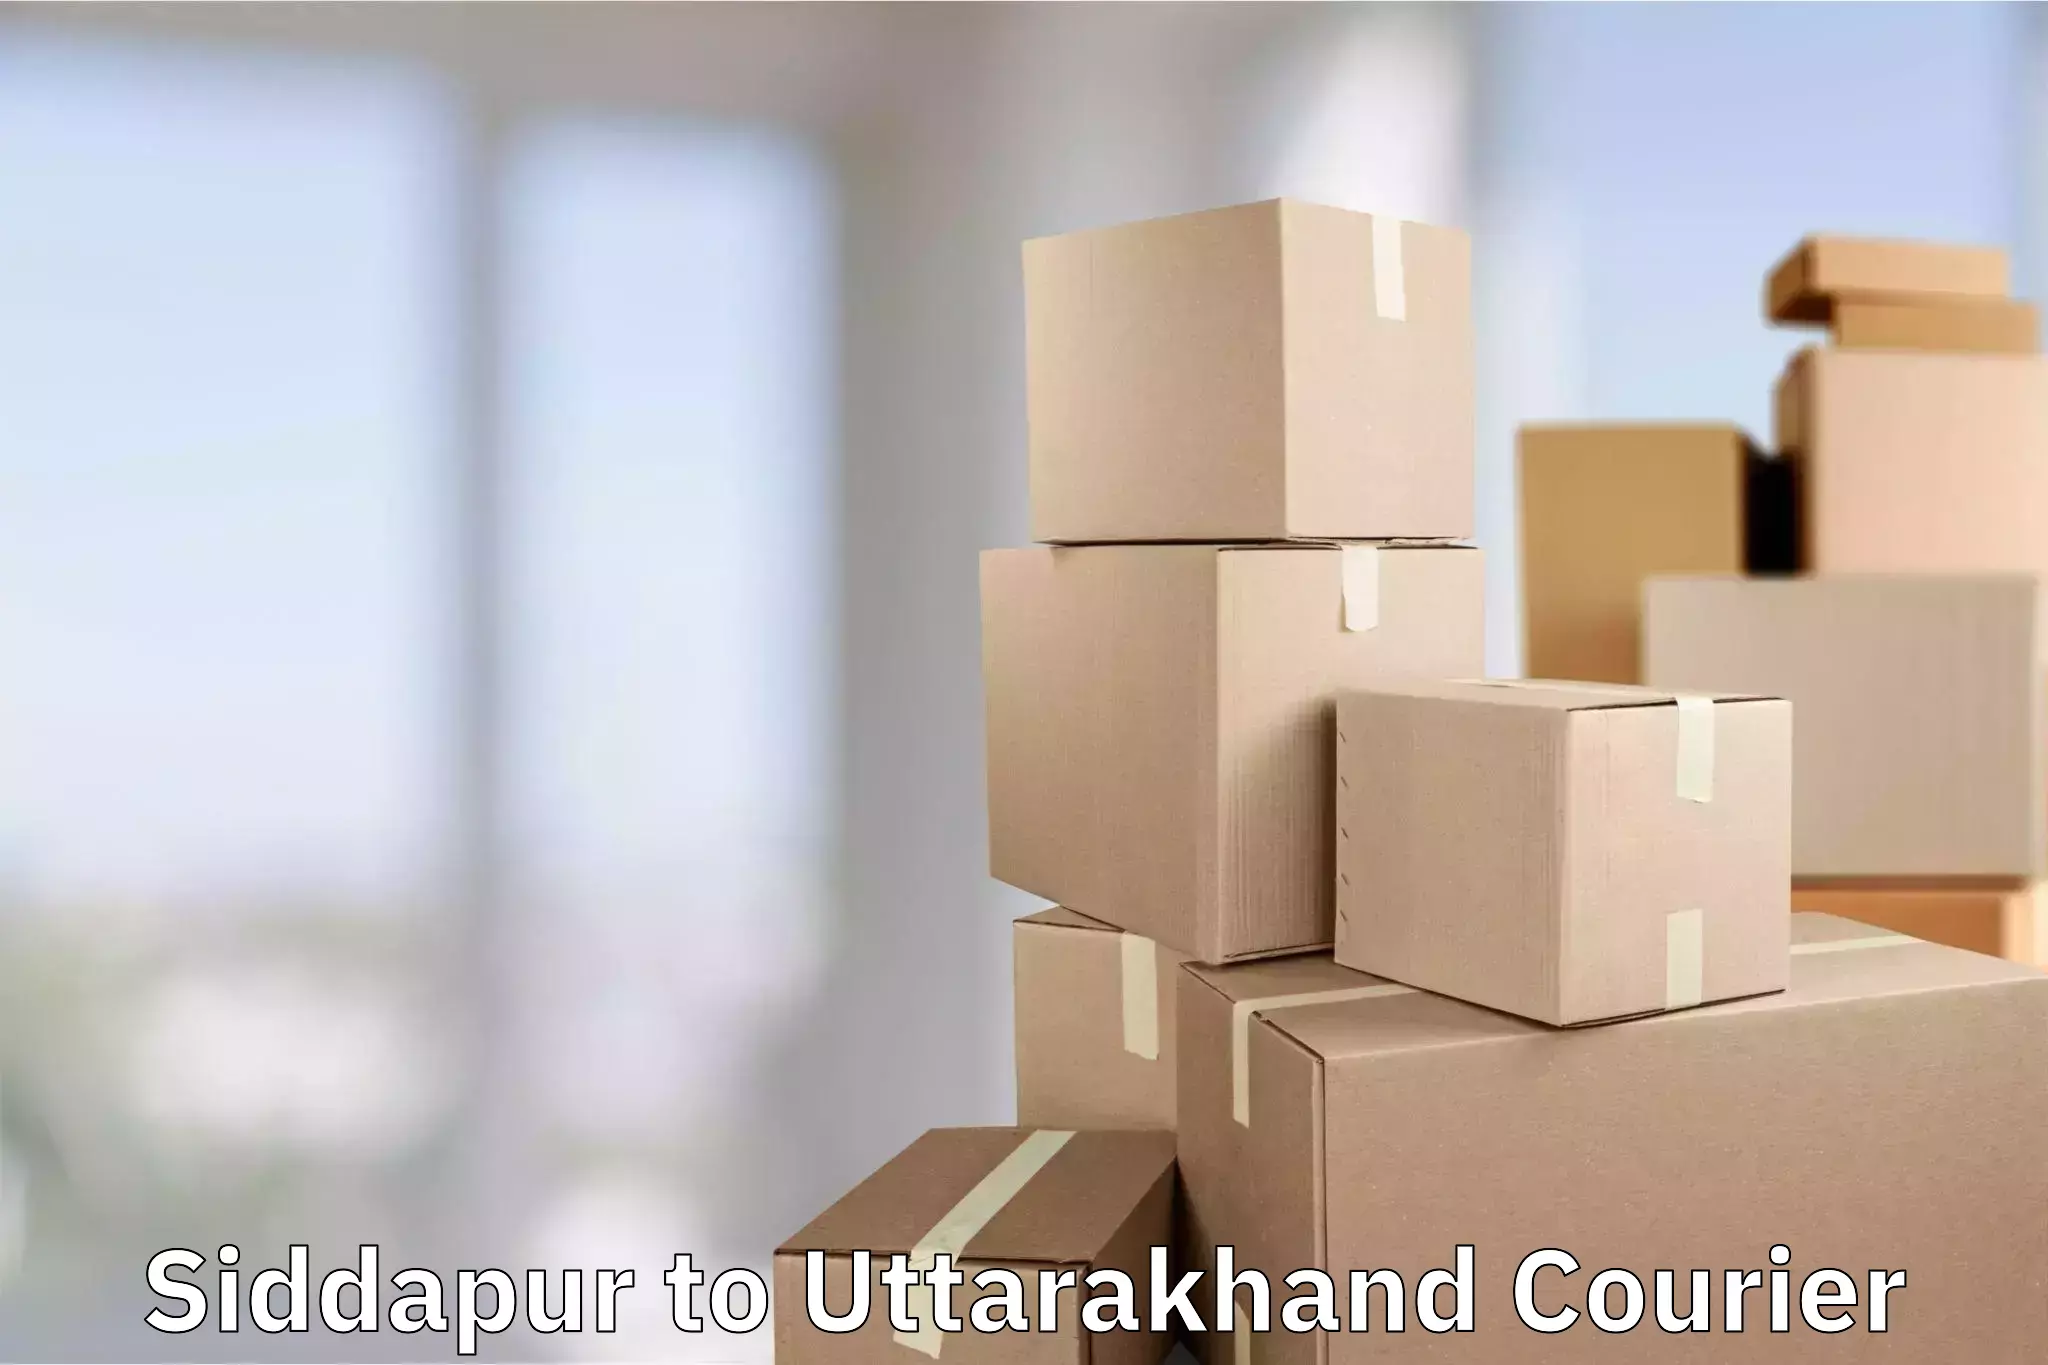 Luggage delivery news Siddapur to Uttarakhand